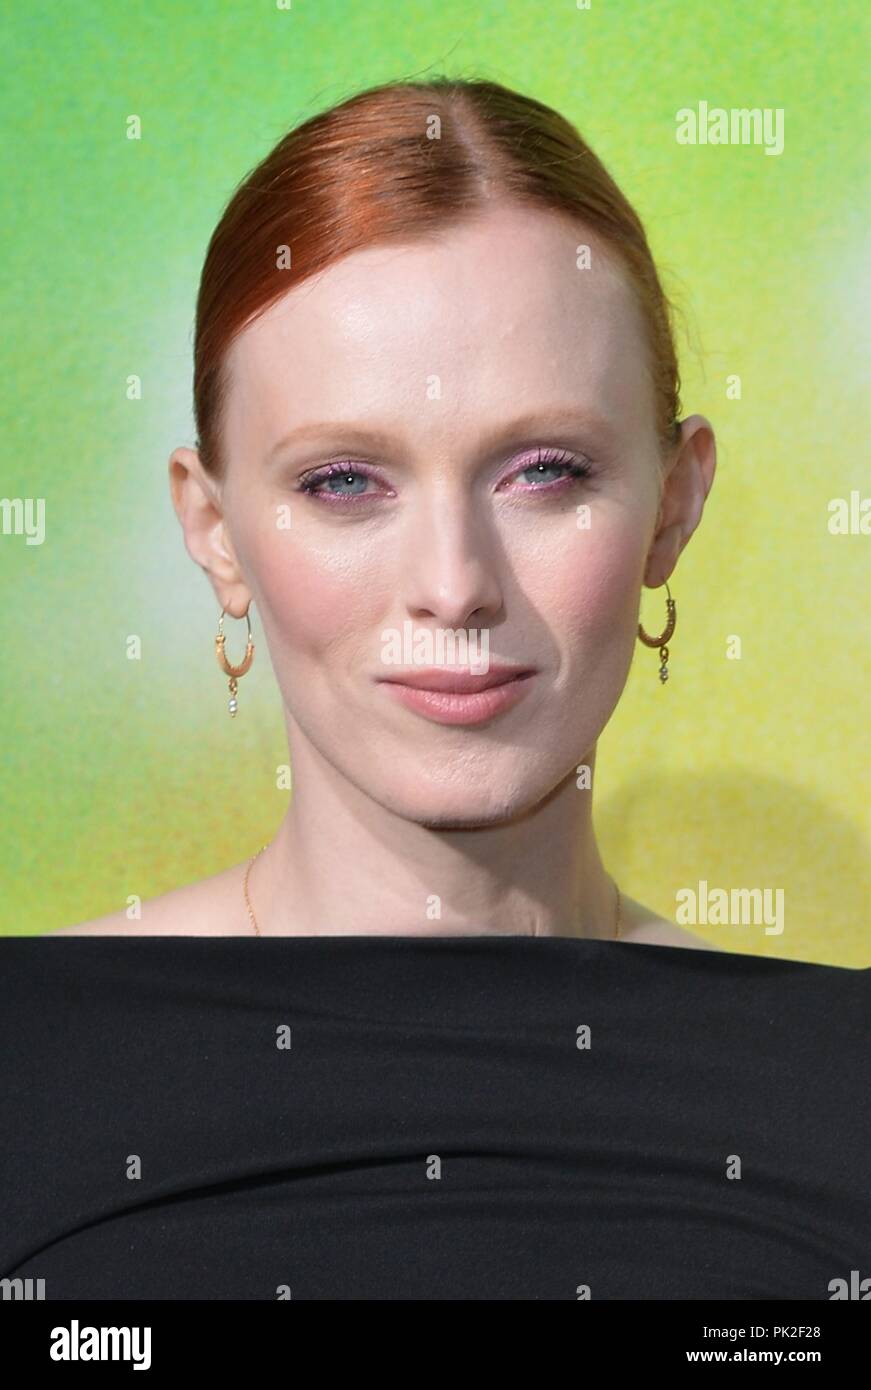 Brooklyn, NY, USA. 9th Sep, 2018. Karen Elson at arrivals for Business of Fashion 500 Gala Dinner, 1 Hotel Brooklyn Bridge, Brooklyn, NY September 9, 2018. Credit: Kristin Callahan/Everett Collection/Alamy Live News Stock Photo